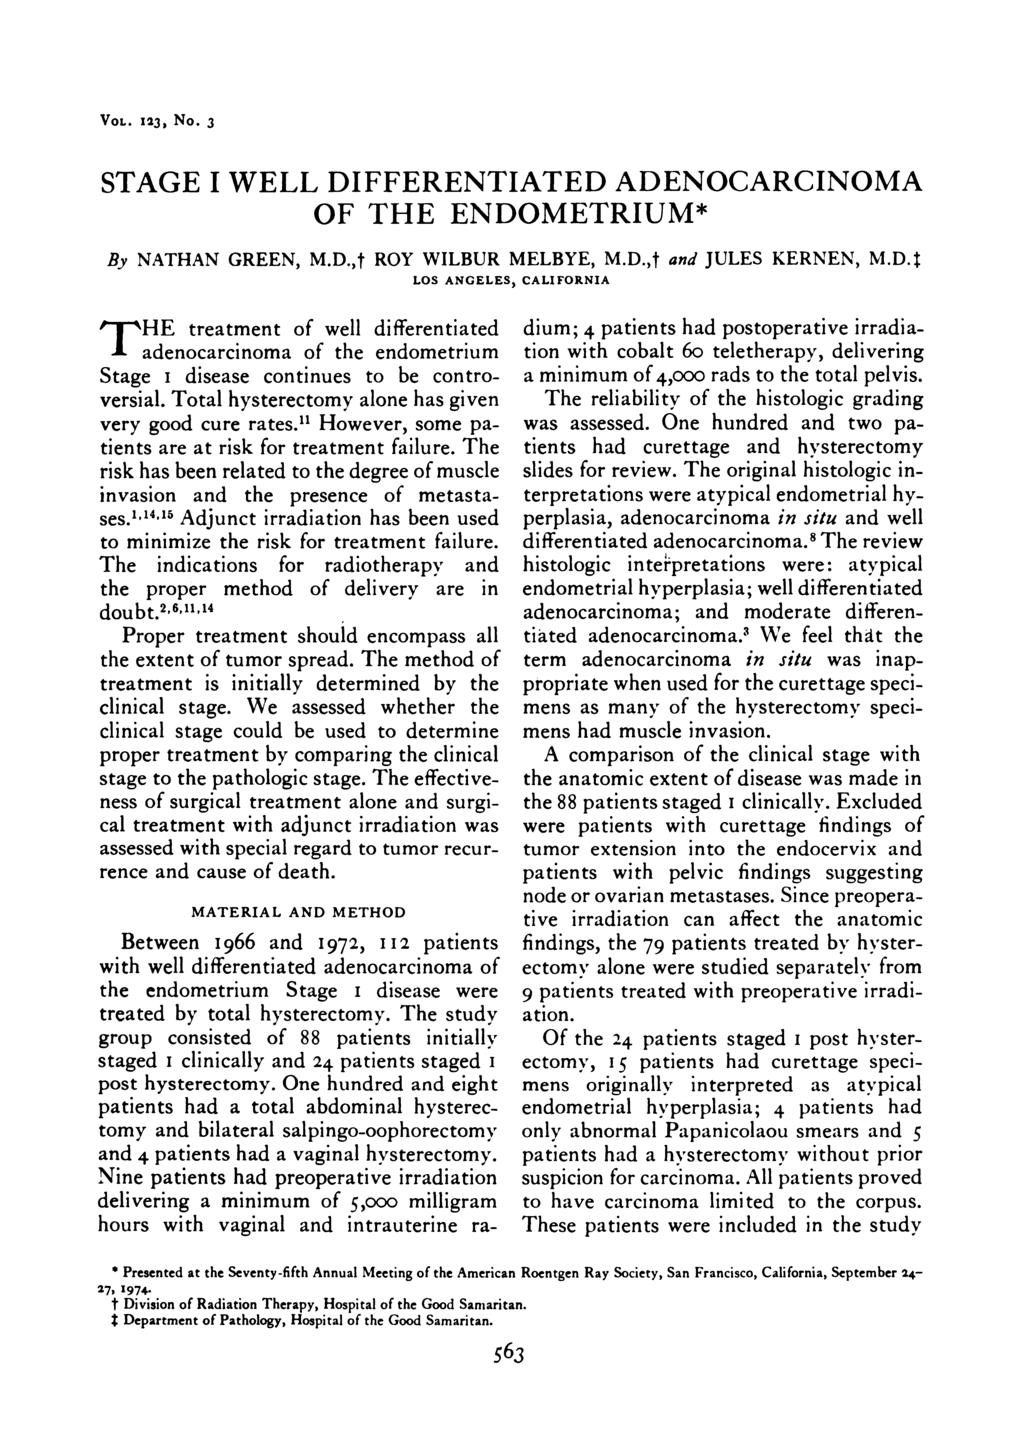 VOL. 123, No. 3 STAGE I WELL DIFFERENTIATED ADENOCARCINOMA OF THE ENDOMETRIUM* By NATHAN GREEN, M.D.,t ROY WILBUR MELBYE, M.D.,t and JULES KERNEN, M.